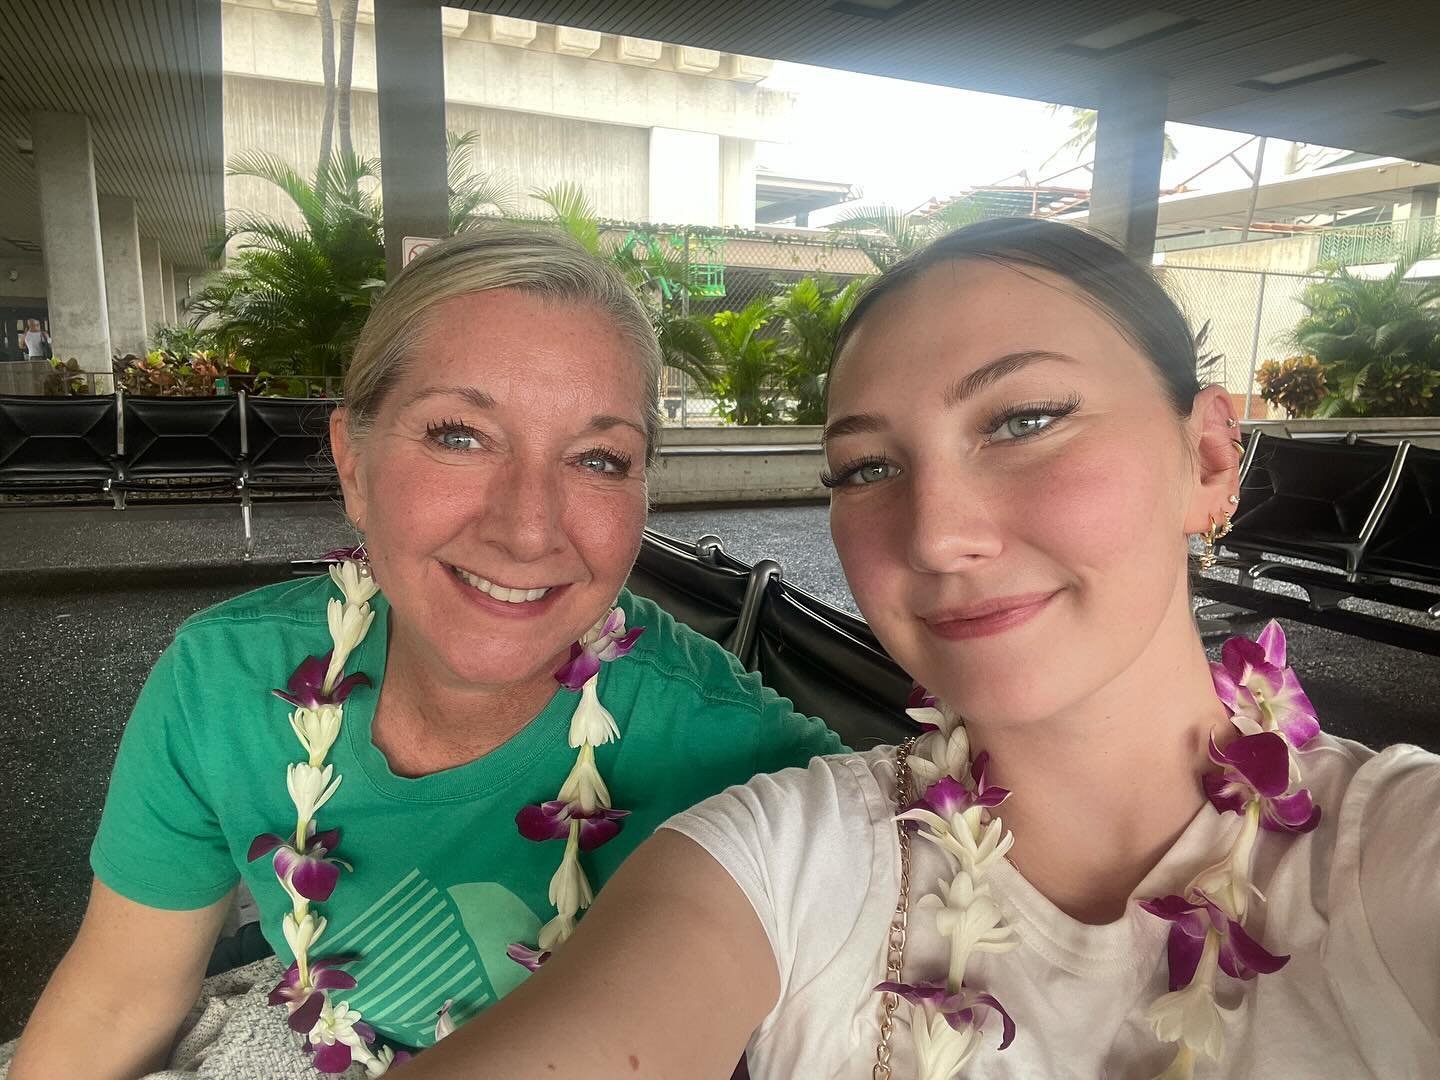 All of these negative temperatures are reminding me of a month ago when Jess took me to Hawaii. Tropical air, beaches, shopping, and lots of relaxing.  Perfect way to start the holidays. Thanks @jessamynecampbell #mothersanddaughters #hawaii